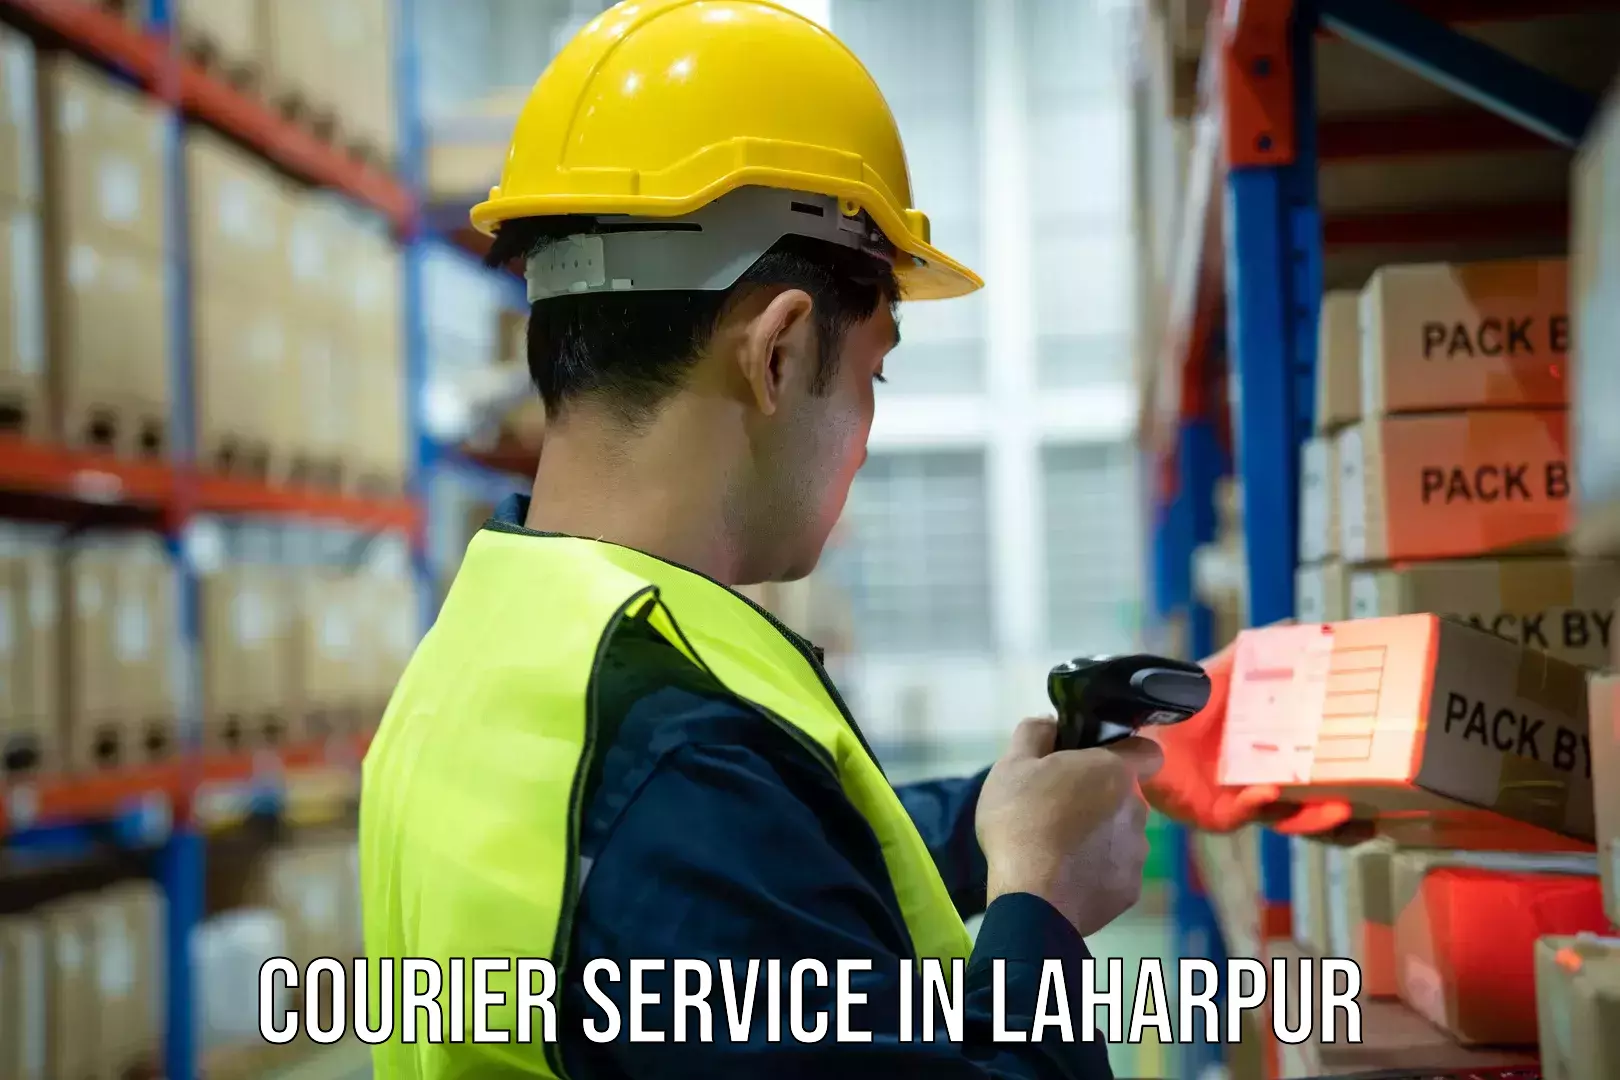 Cargo delivery service in Laharpur